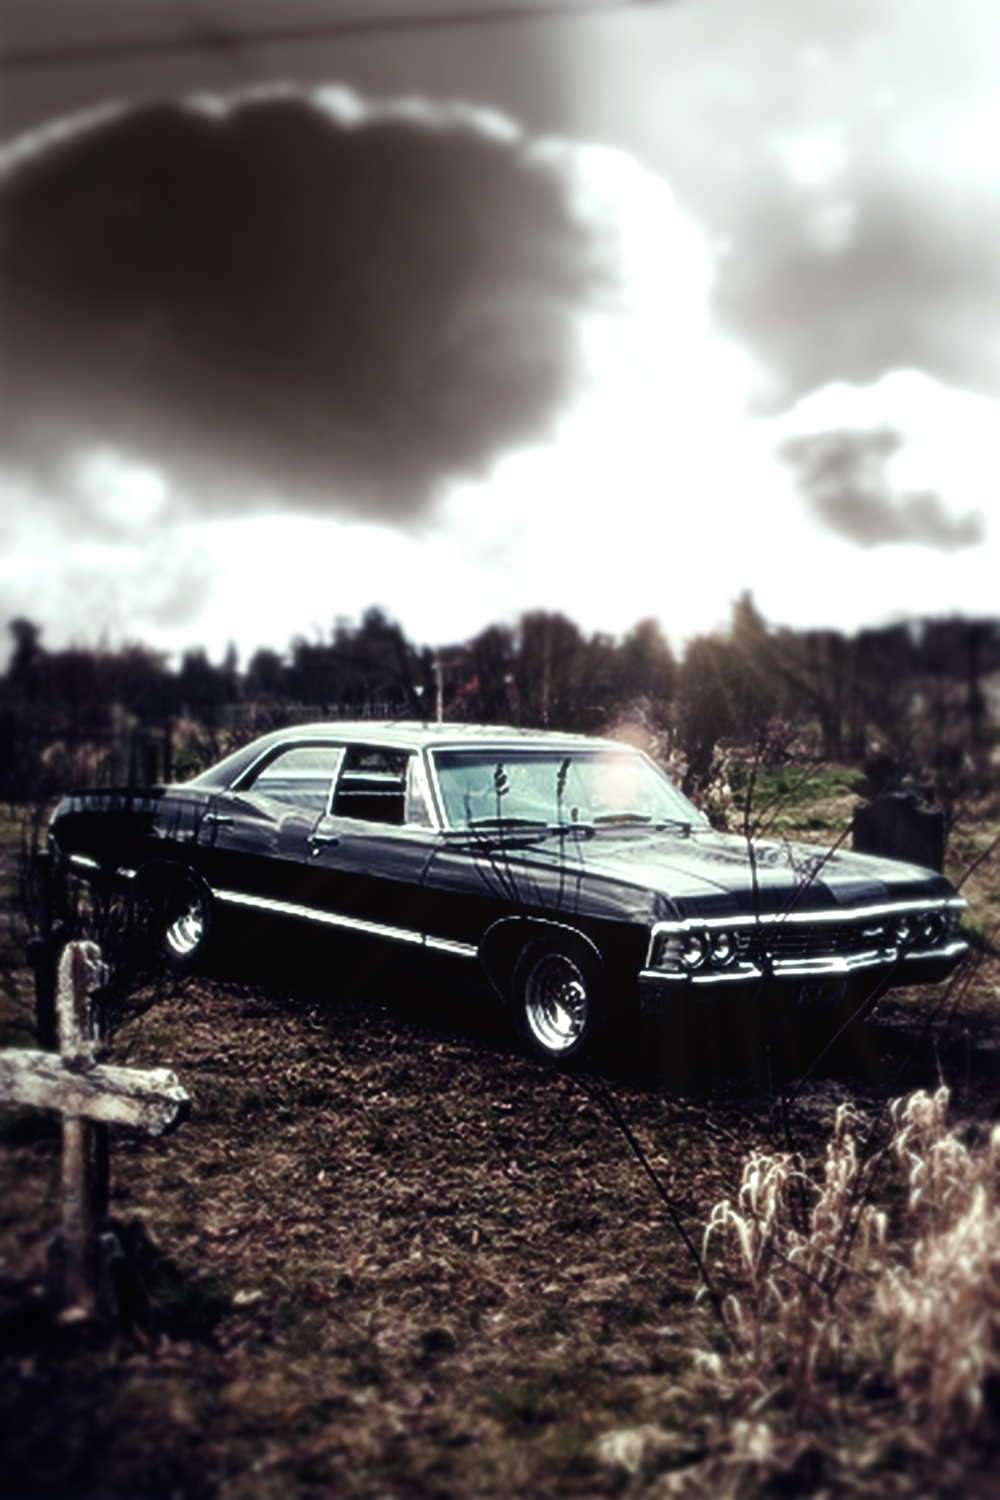 Image - Supernatural 67 chevy impala iphone wallpaper by xerix93